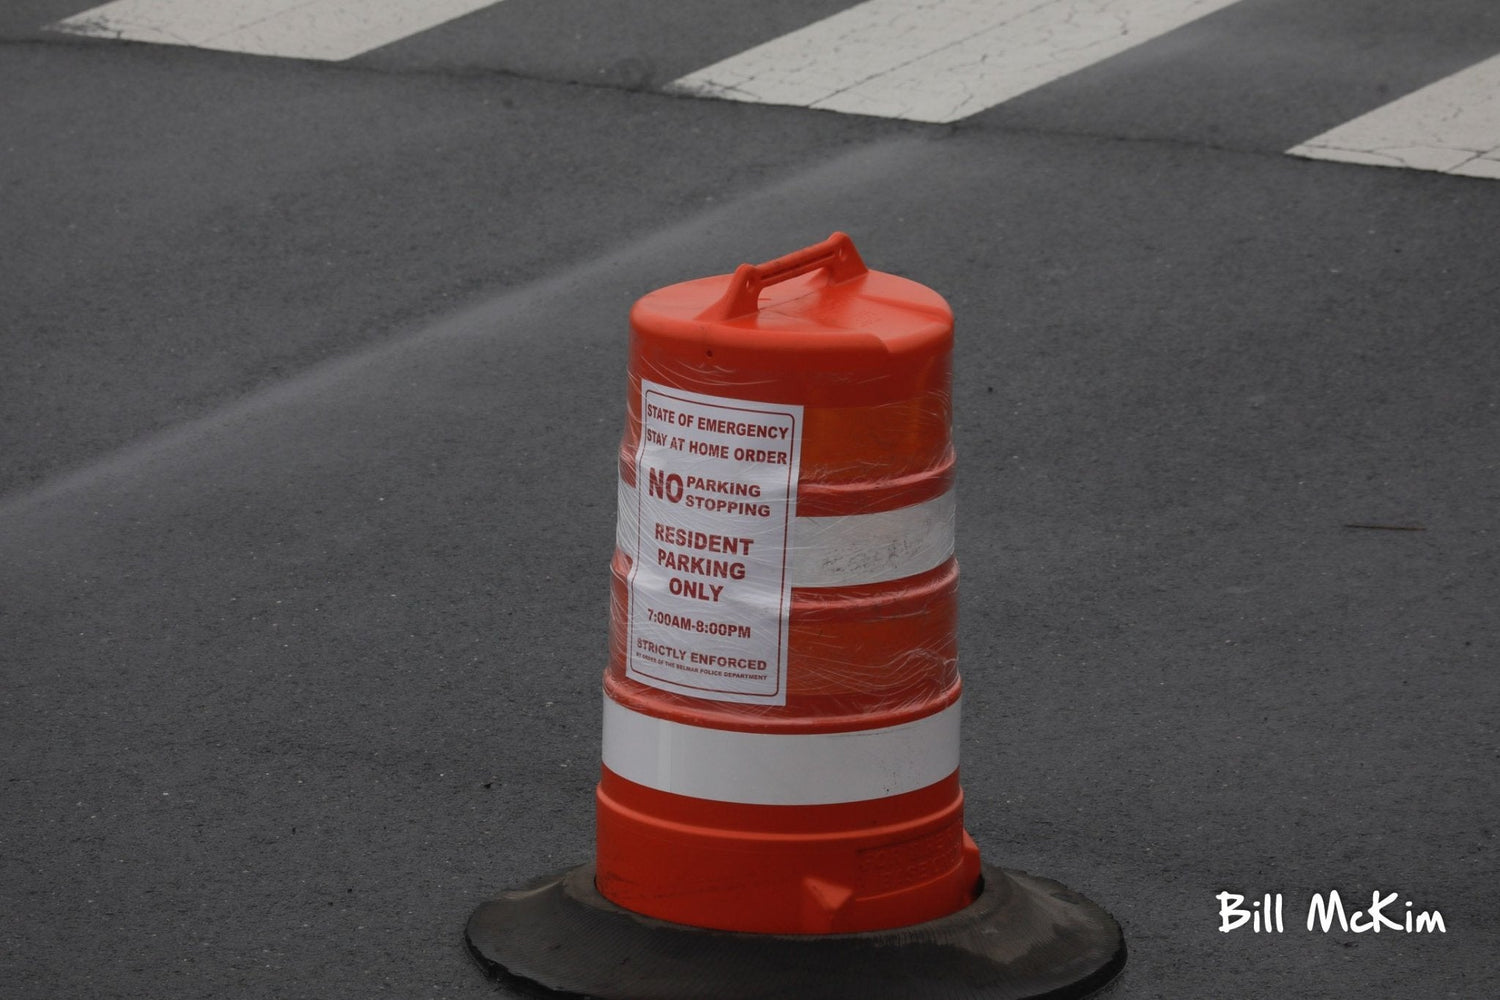 No parking ocean ave DAYTIME state of emergency cones going up in Belmar